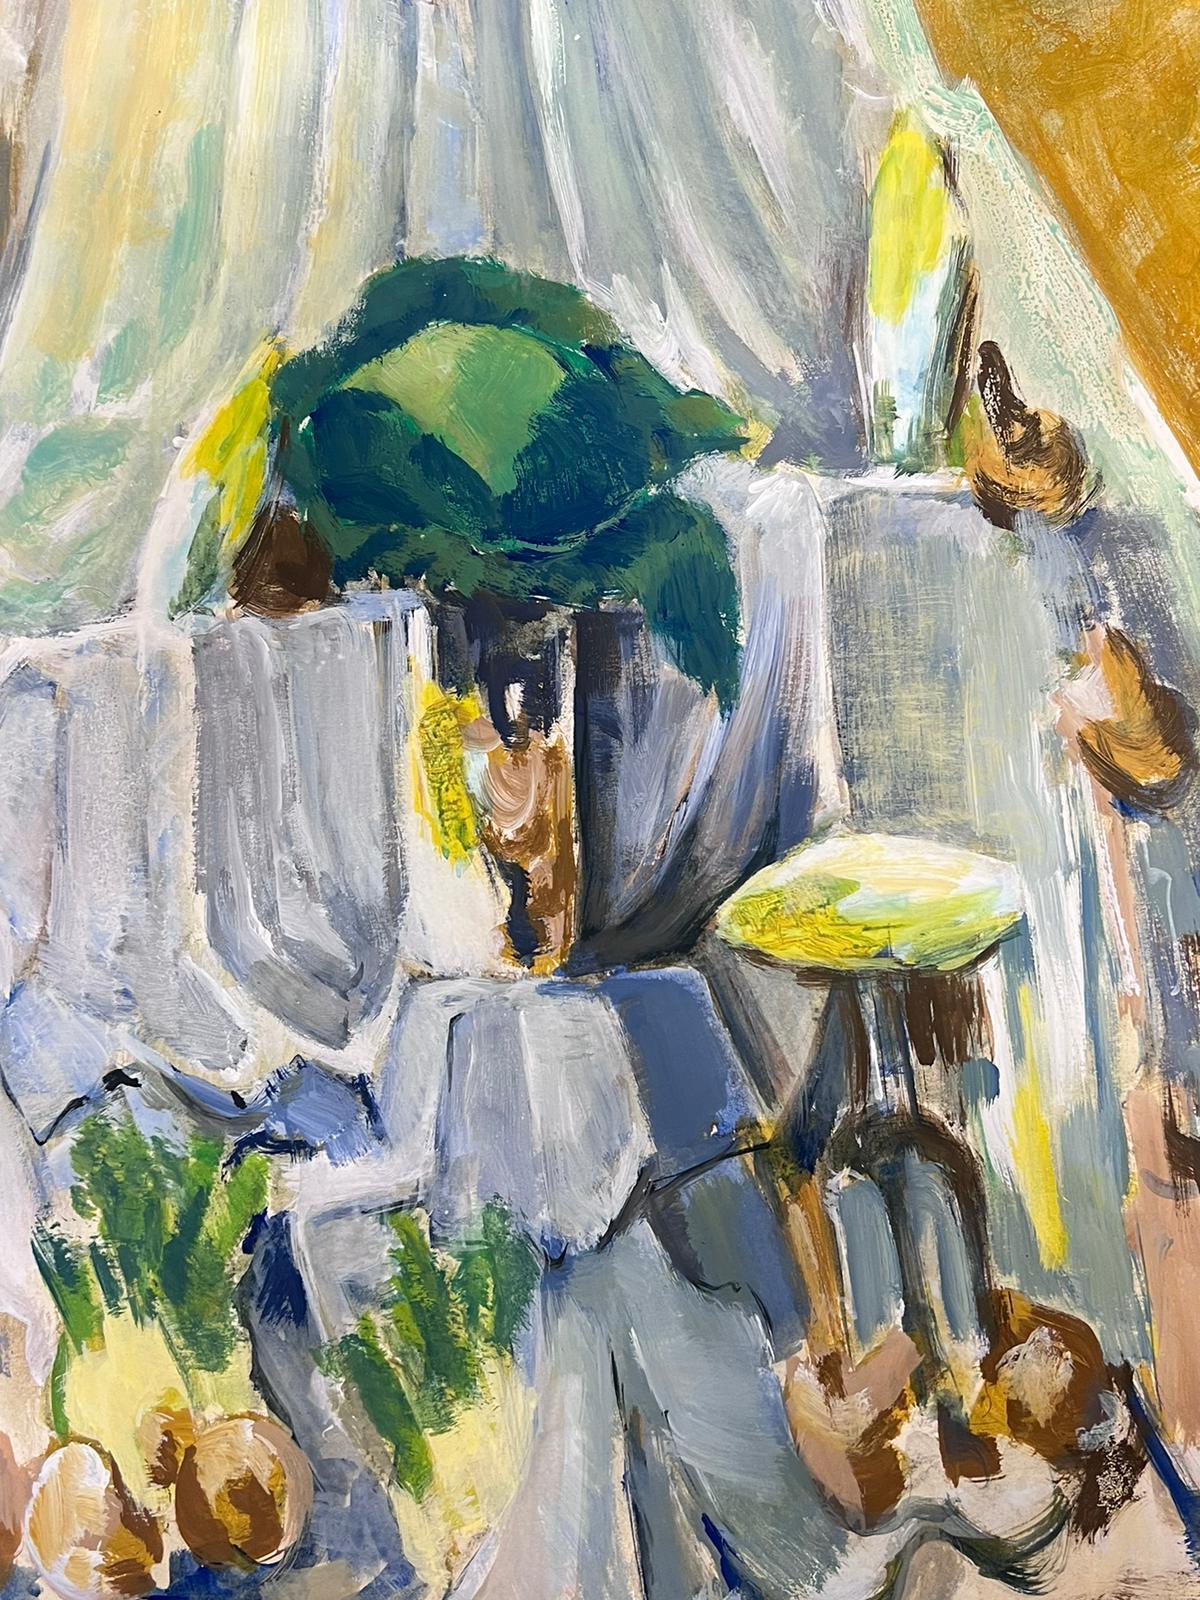 Still Life
by Guy Nicod
(French 1923 - 2021)
oil on artist paper, unframed
painting : 24 x 18 inches
stamped verso
provenance: artists estate, France
condition: very good and sound condition